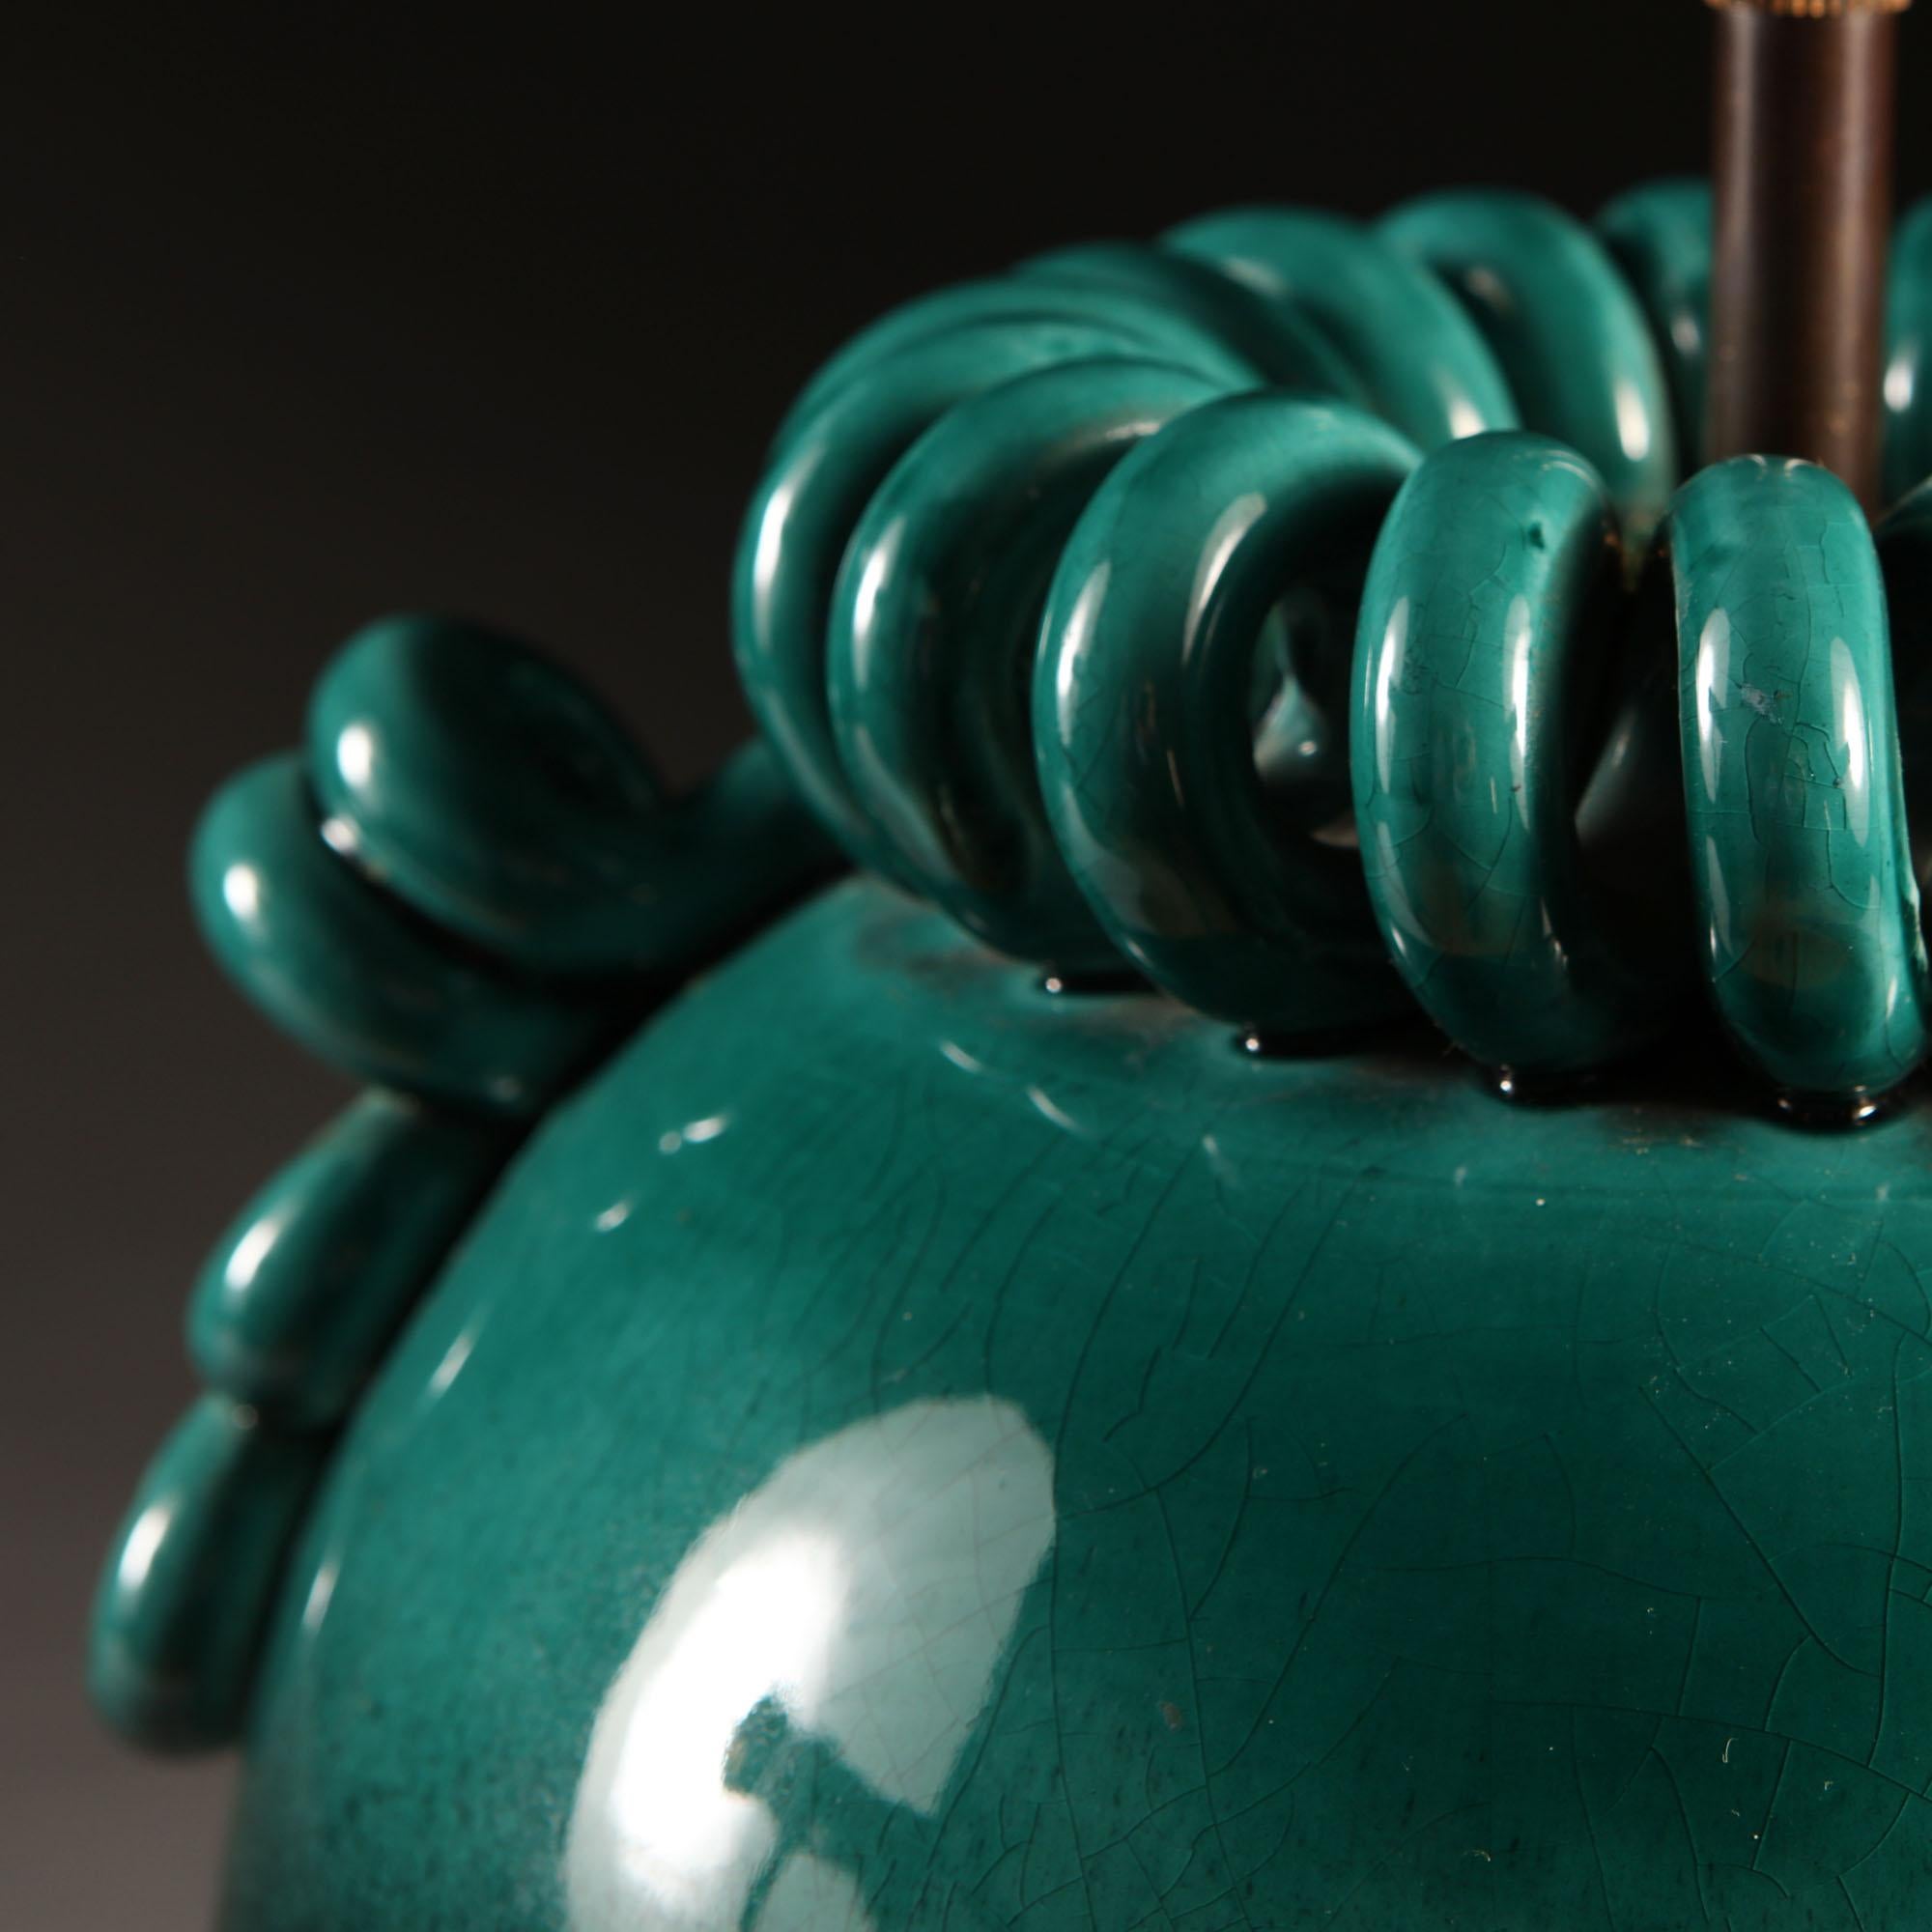 A mid-20th century Italian art pottery vase with turquoise glaze fading into dark green, with serpentine decorative mounts to the rim and serpentine handles to each side, now mounted as a lamp.

Please note: lampshade not included.

Currently